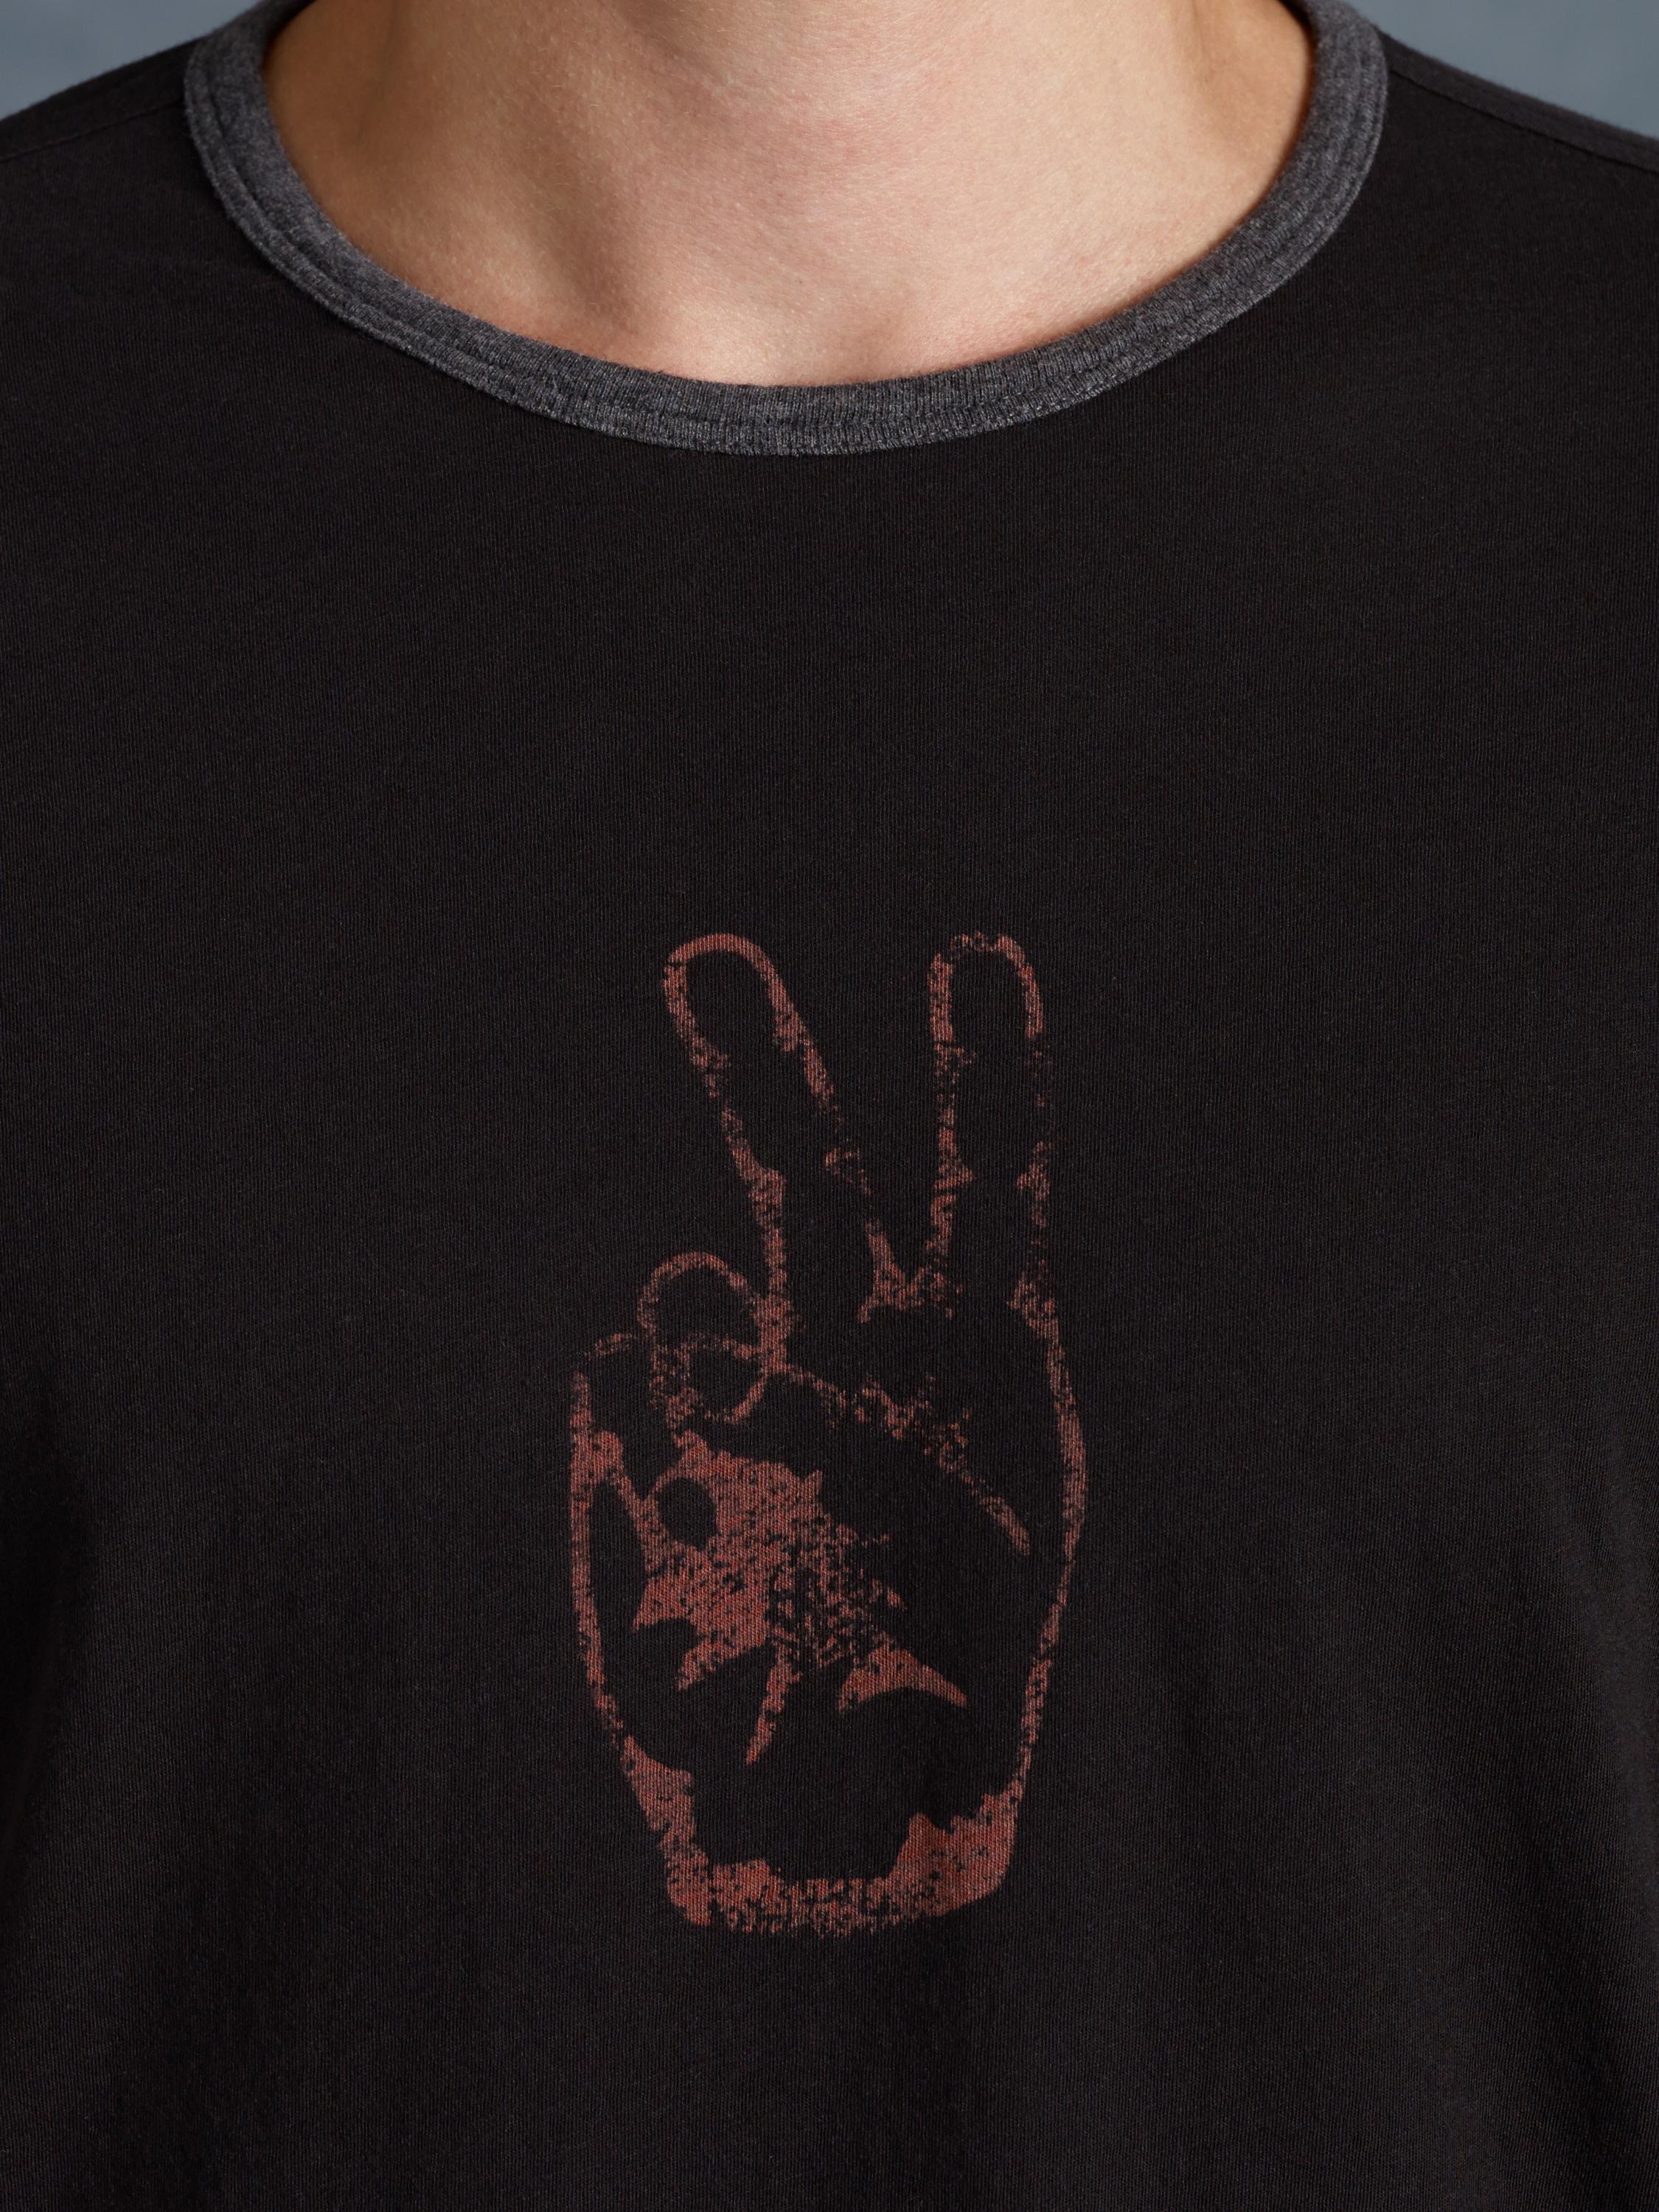 HAND PEACE SIGN GRAPHIC TEE image number 3